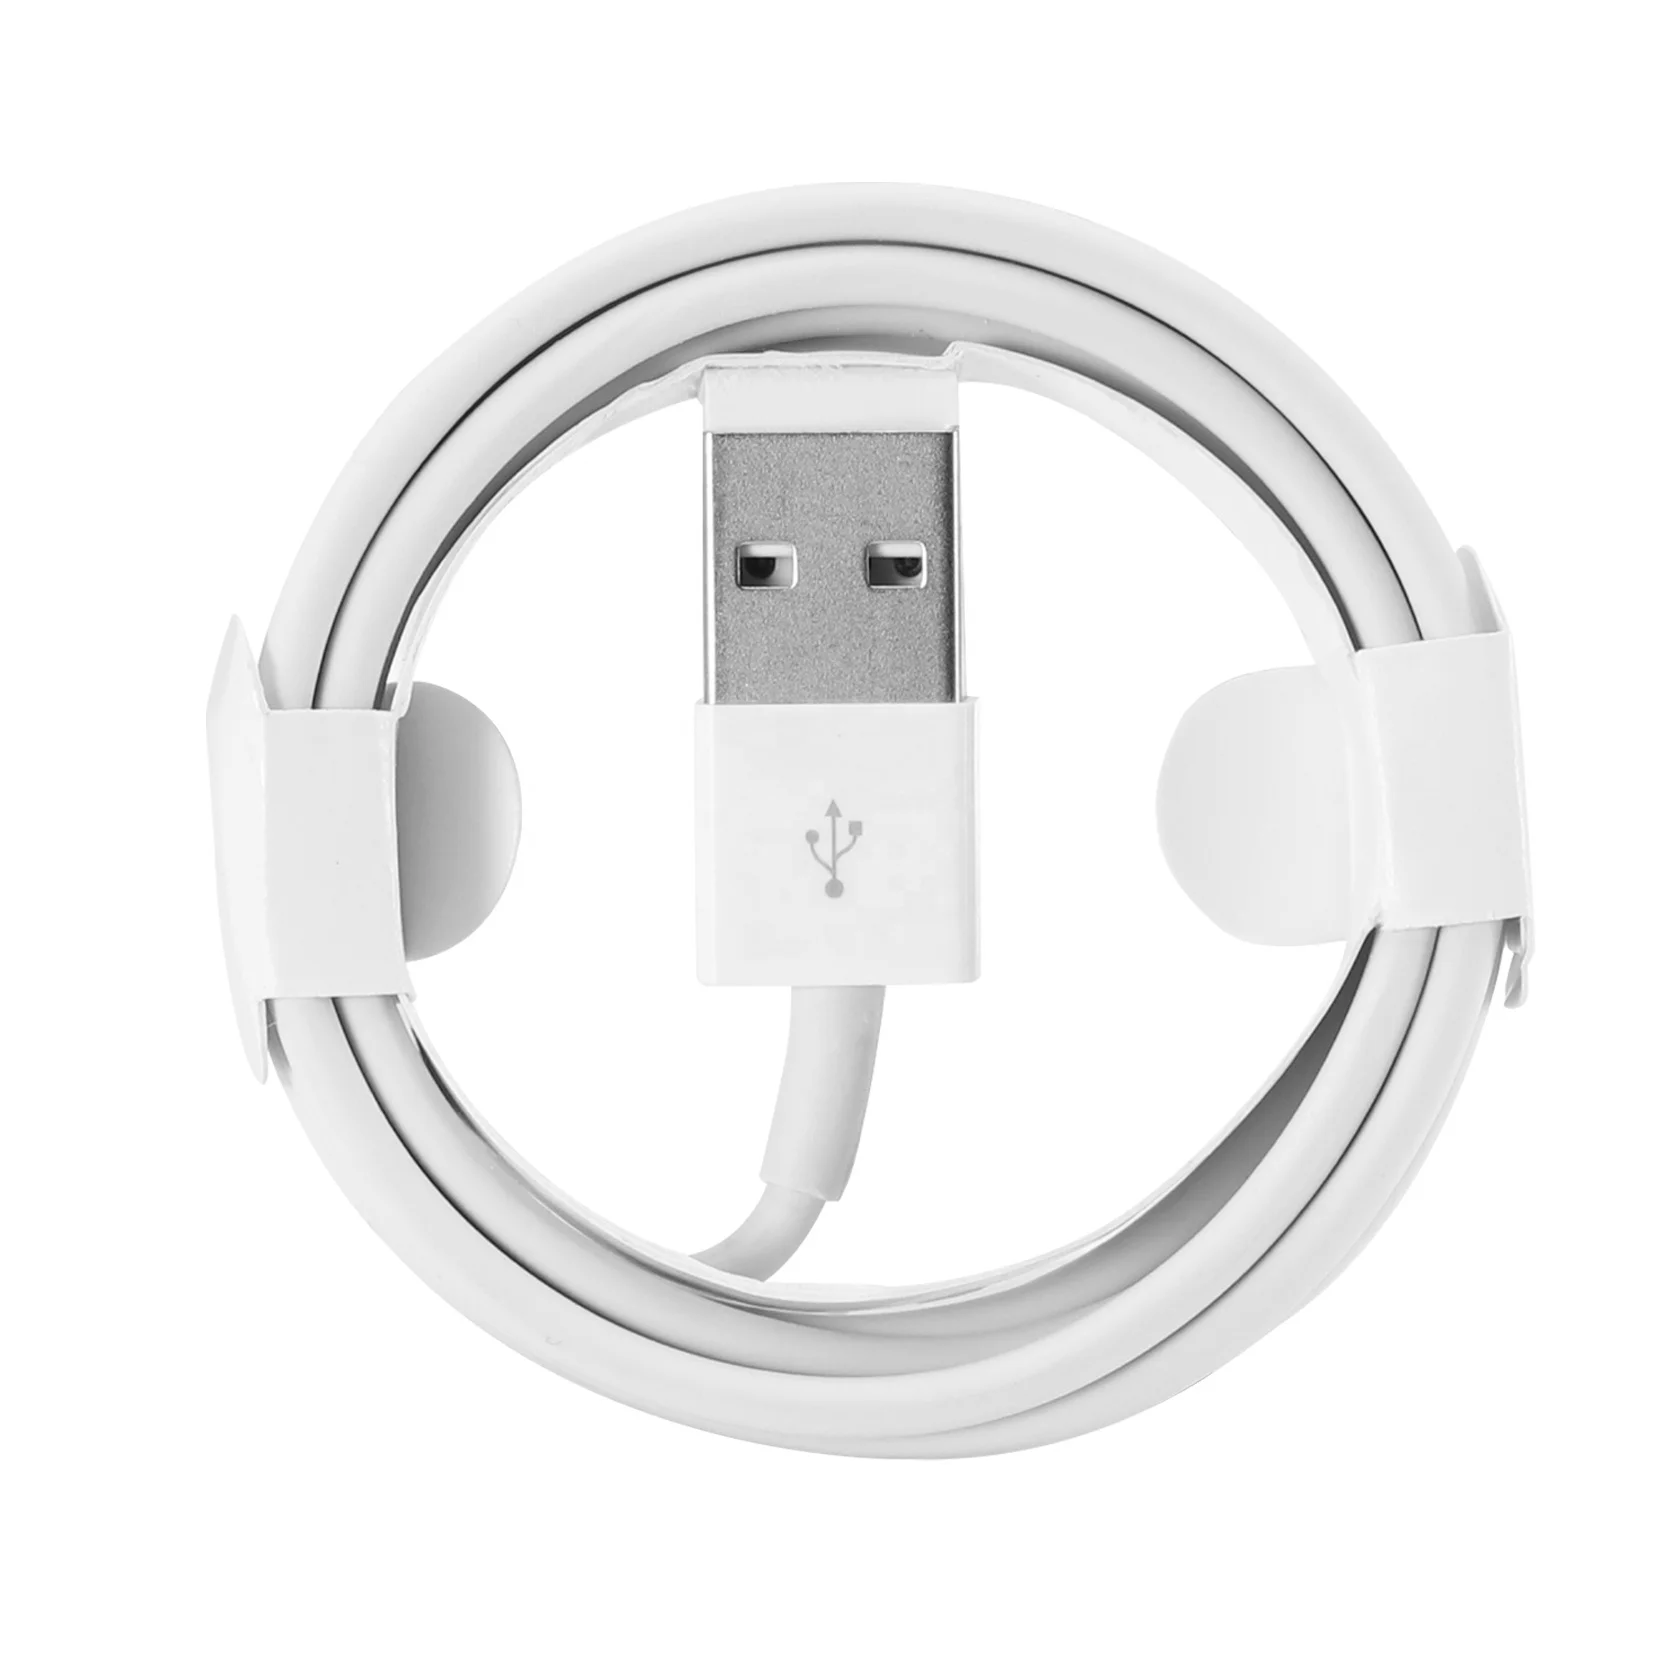 

1m 2m 3m Mobile Phone Cable USB Sync Fast Charging Data Charger Cable For iPhone 6 6s 7 8 plus X Xr Xs 11 12 pro max for ipad, White